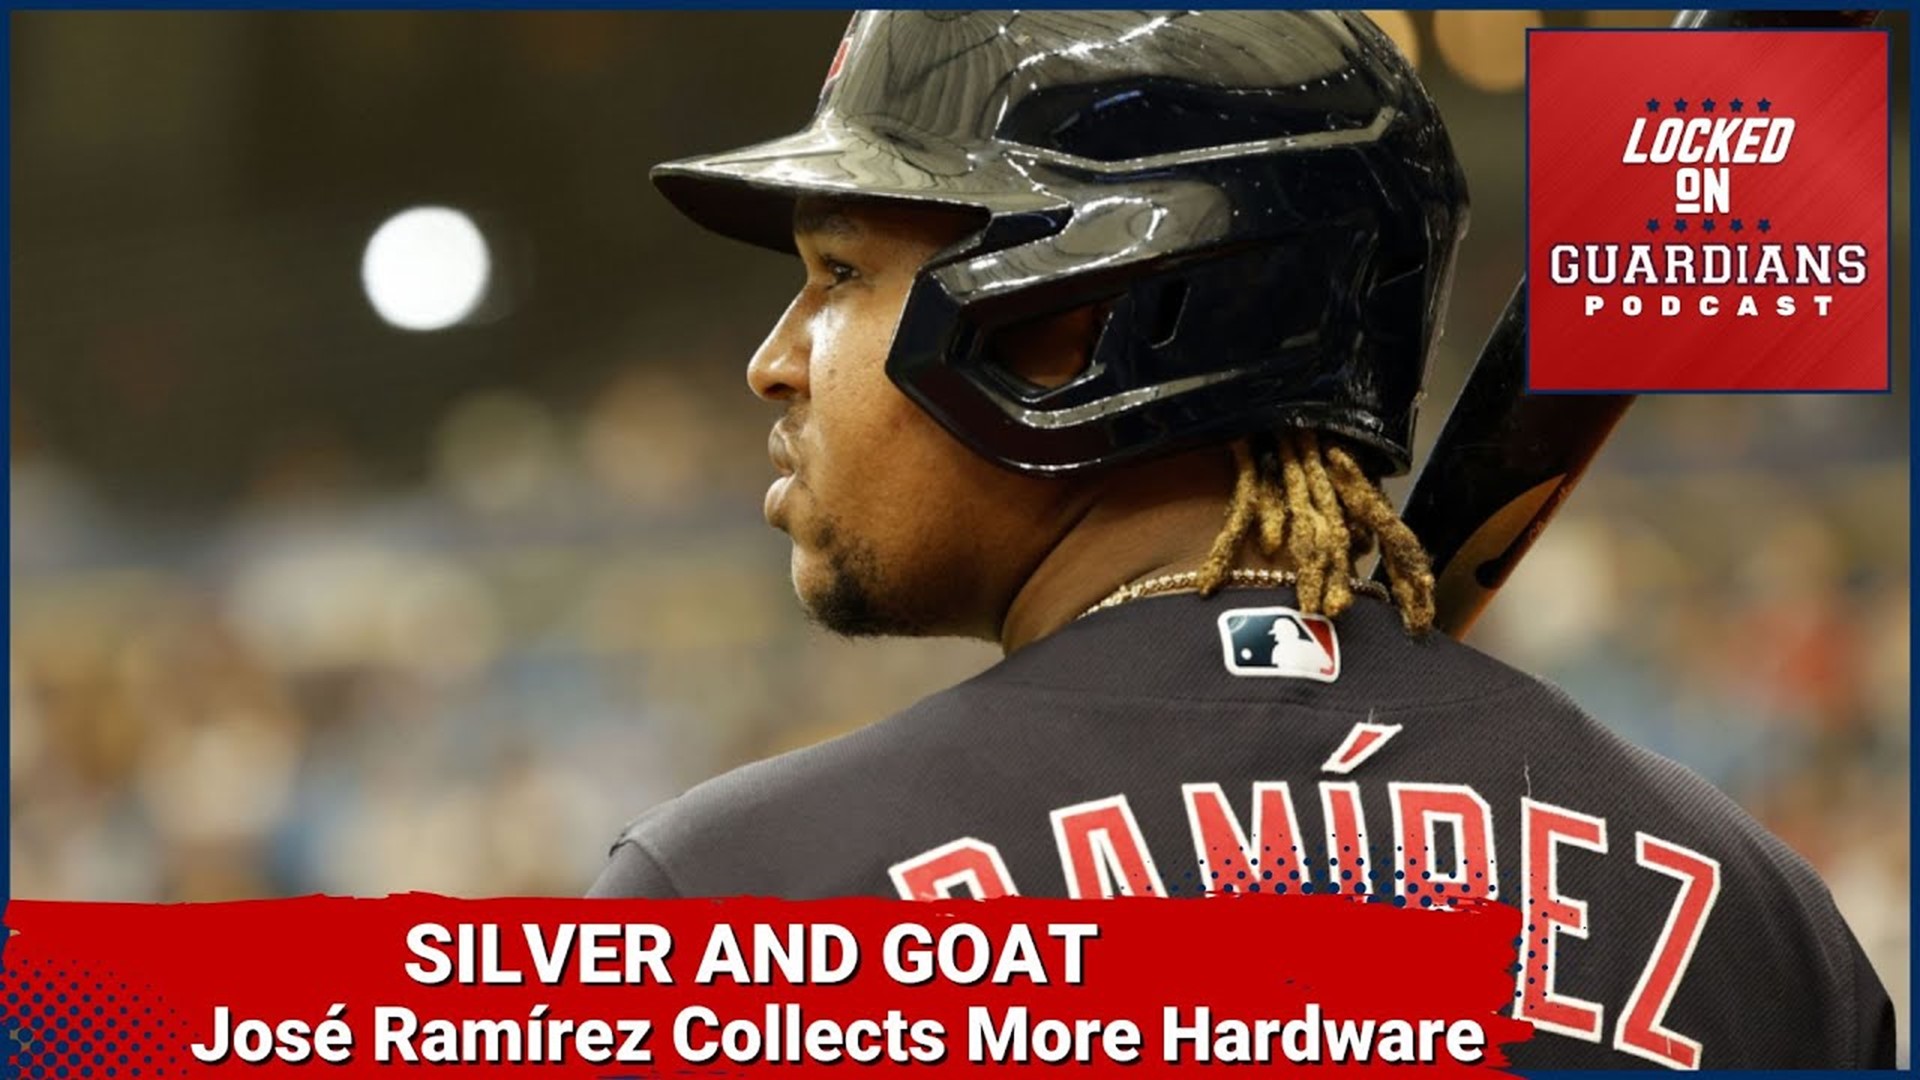 José Ramírez wins a well-deserved Silver Slugger. That's just one of our topics in today's Locked On Guardians podcast.